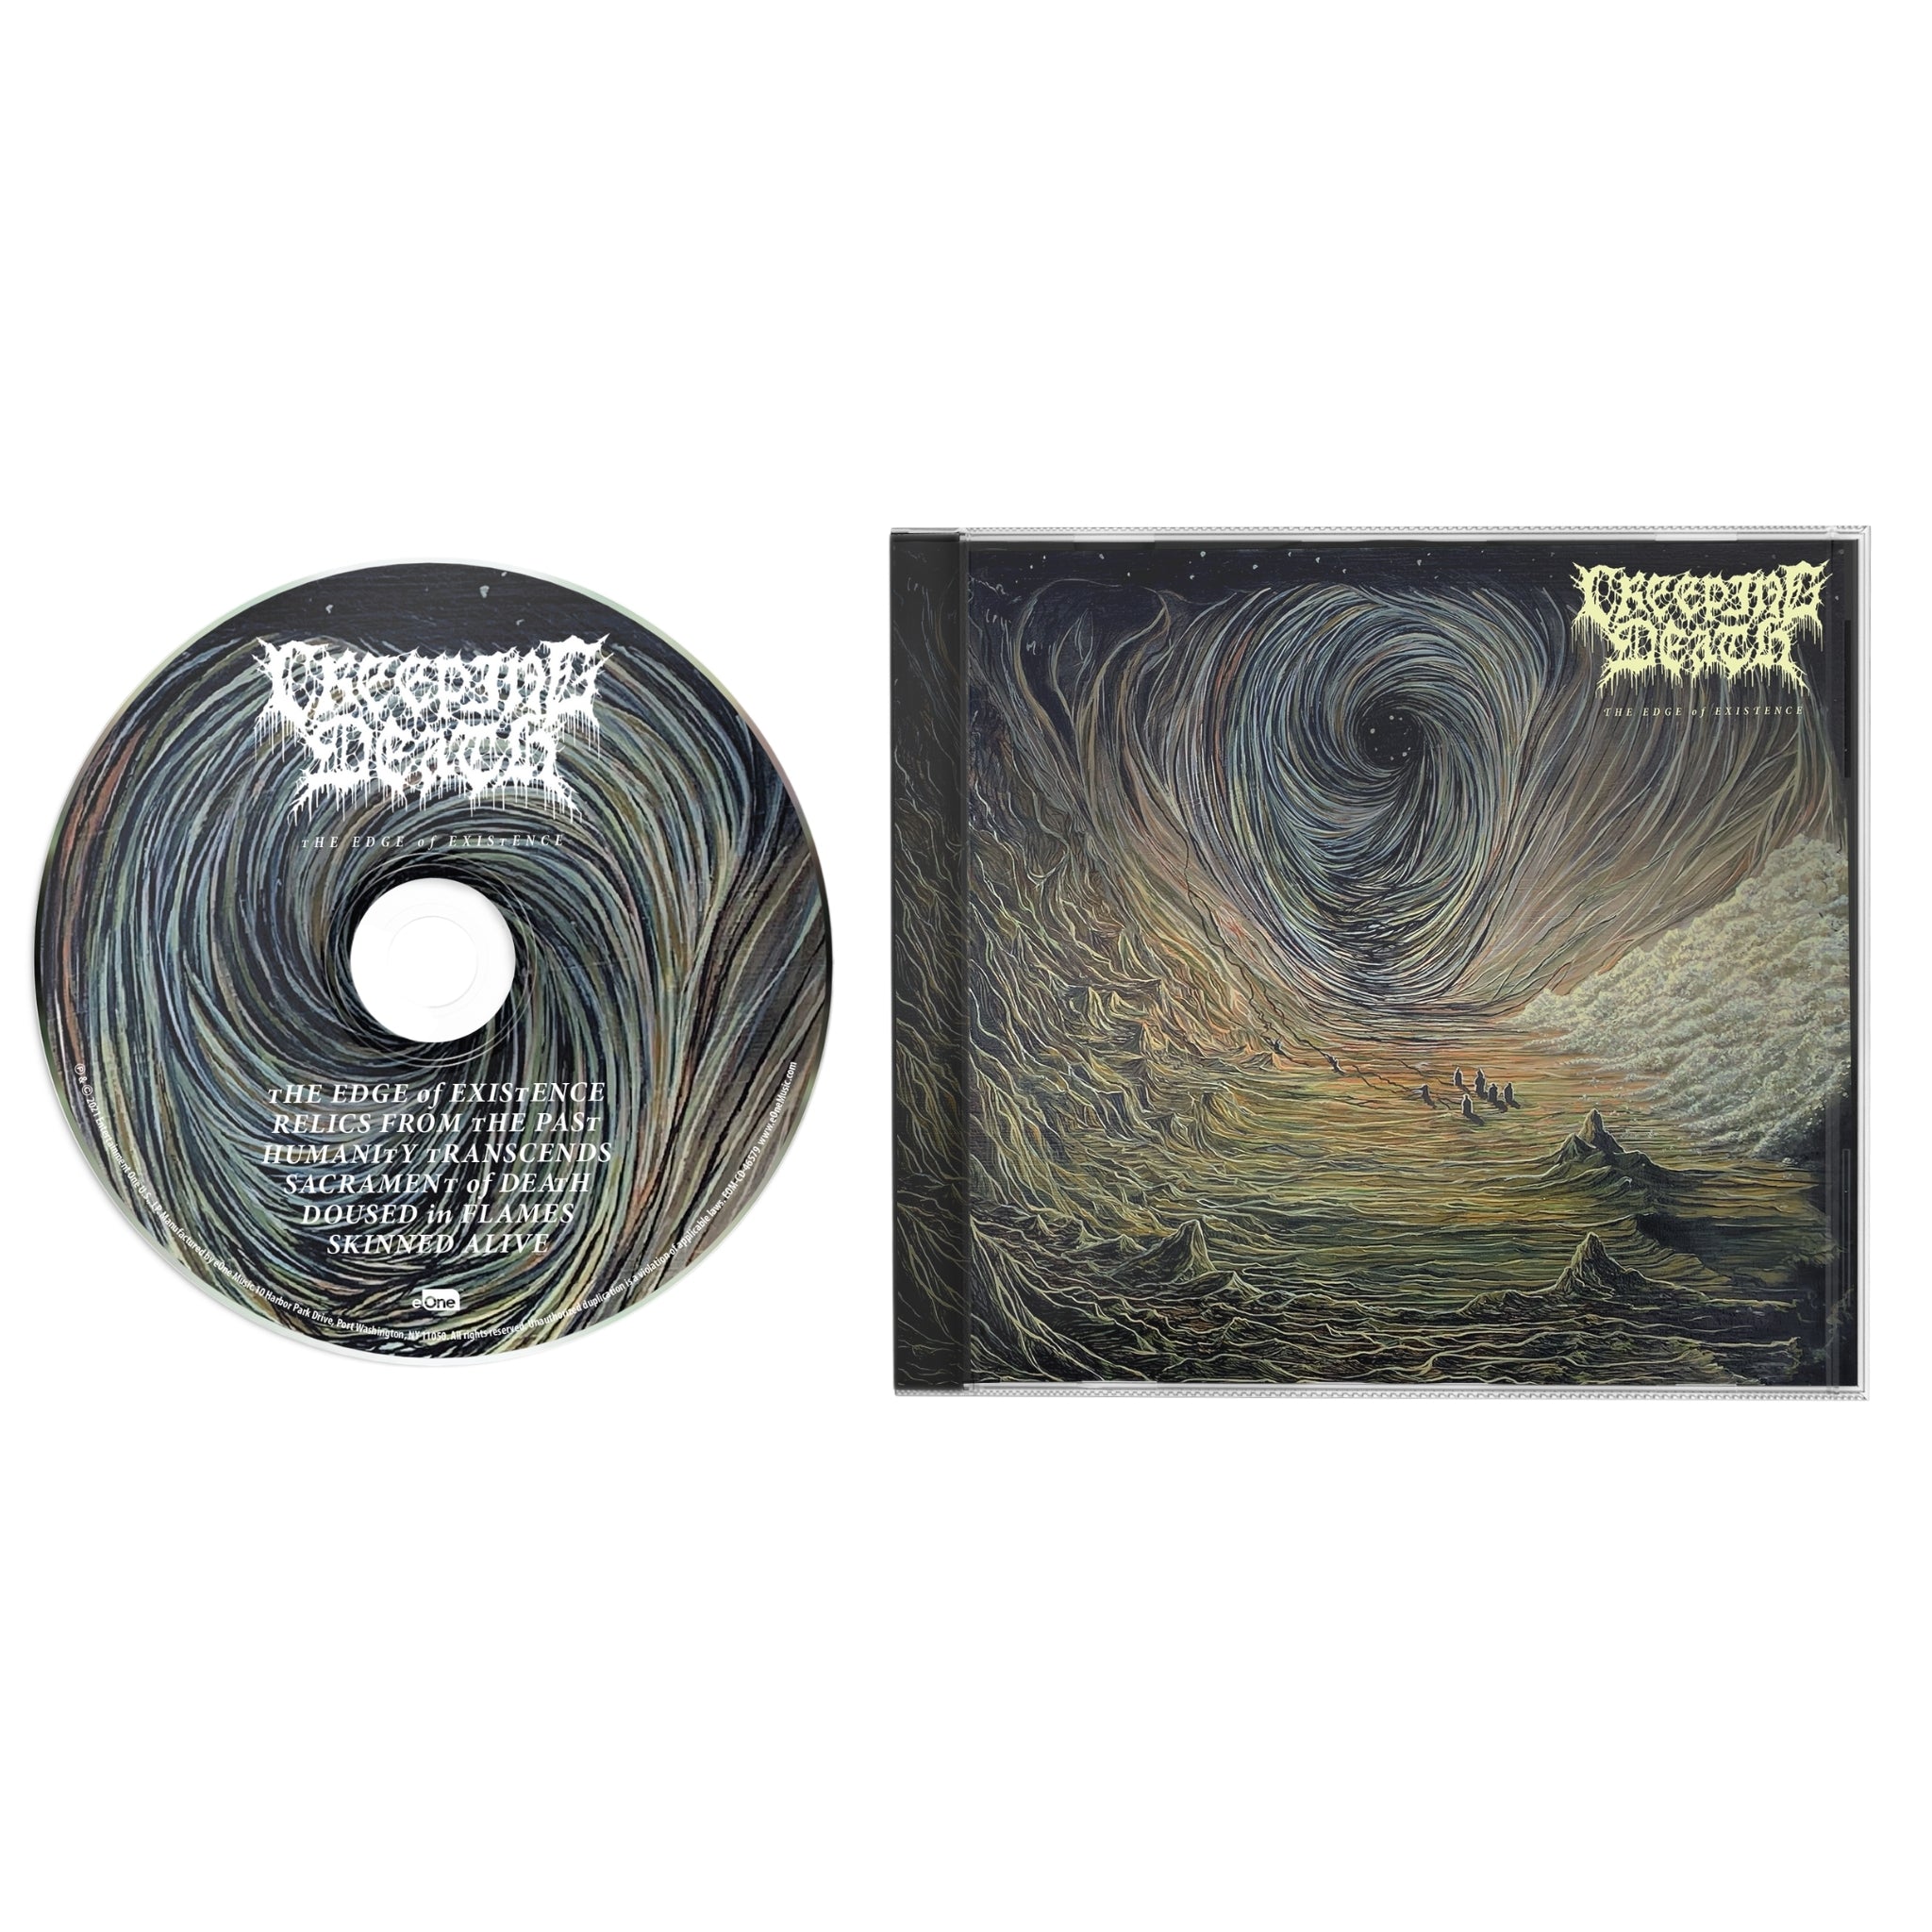 Creeping Death - The Edge Of Existence; CD Jewel Case